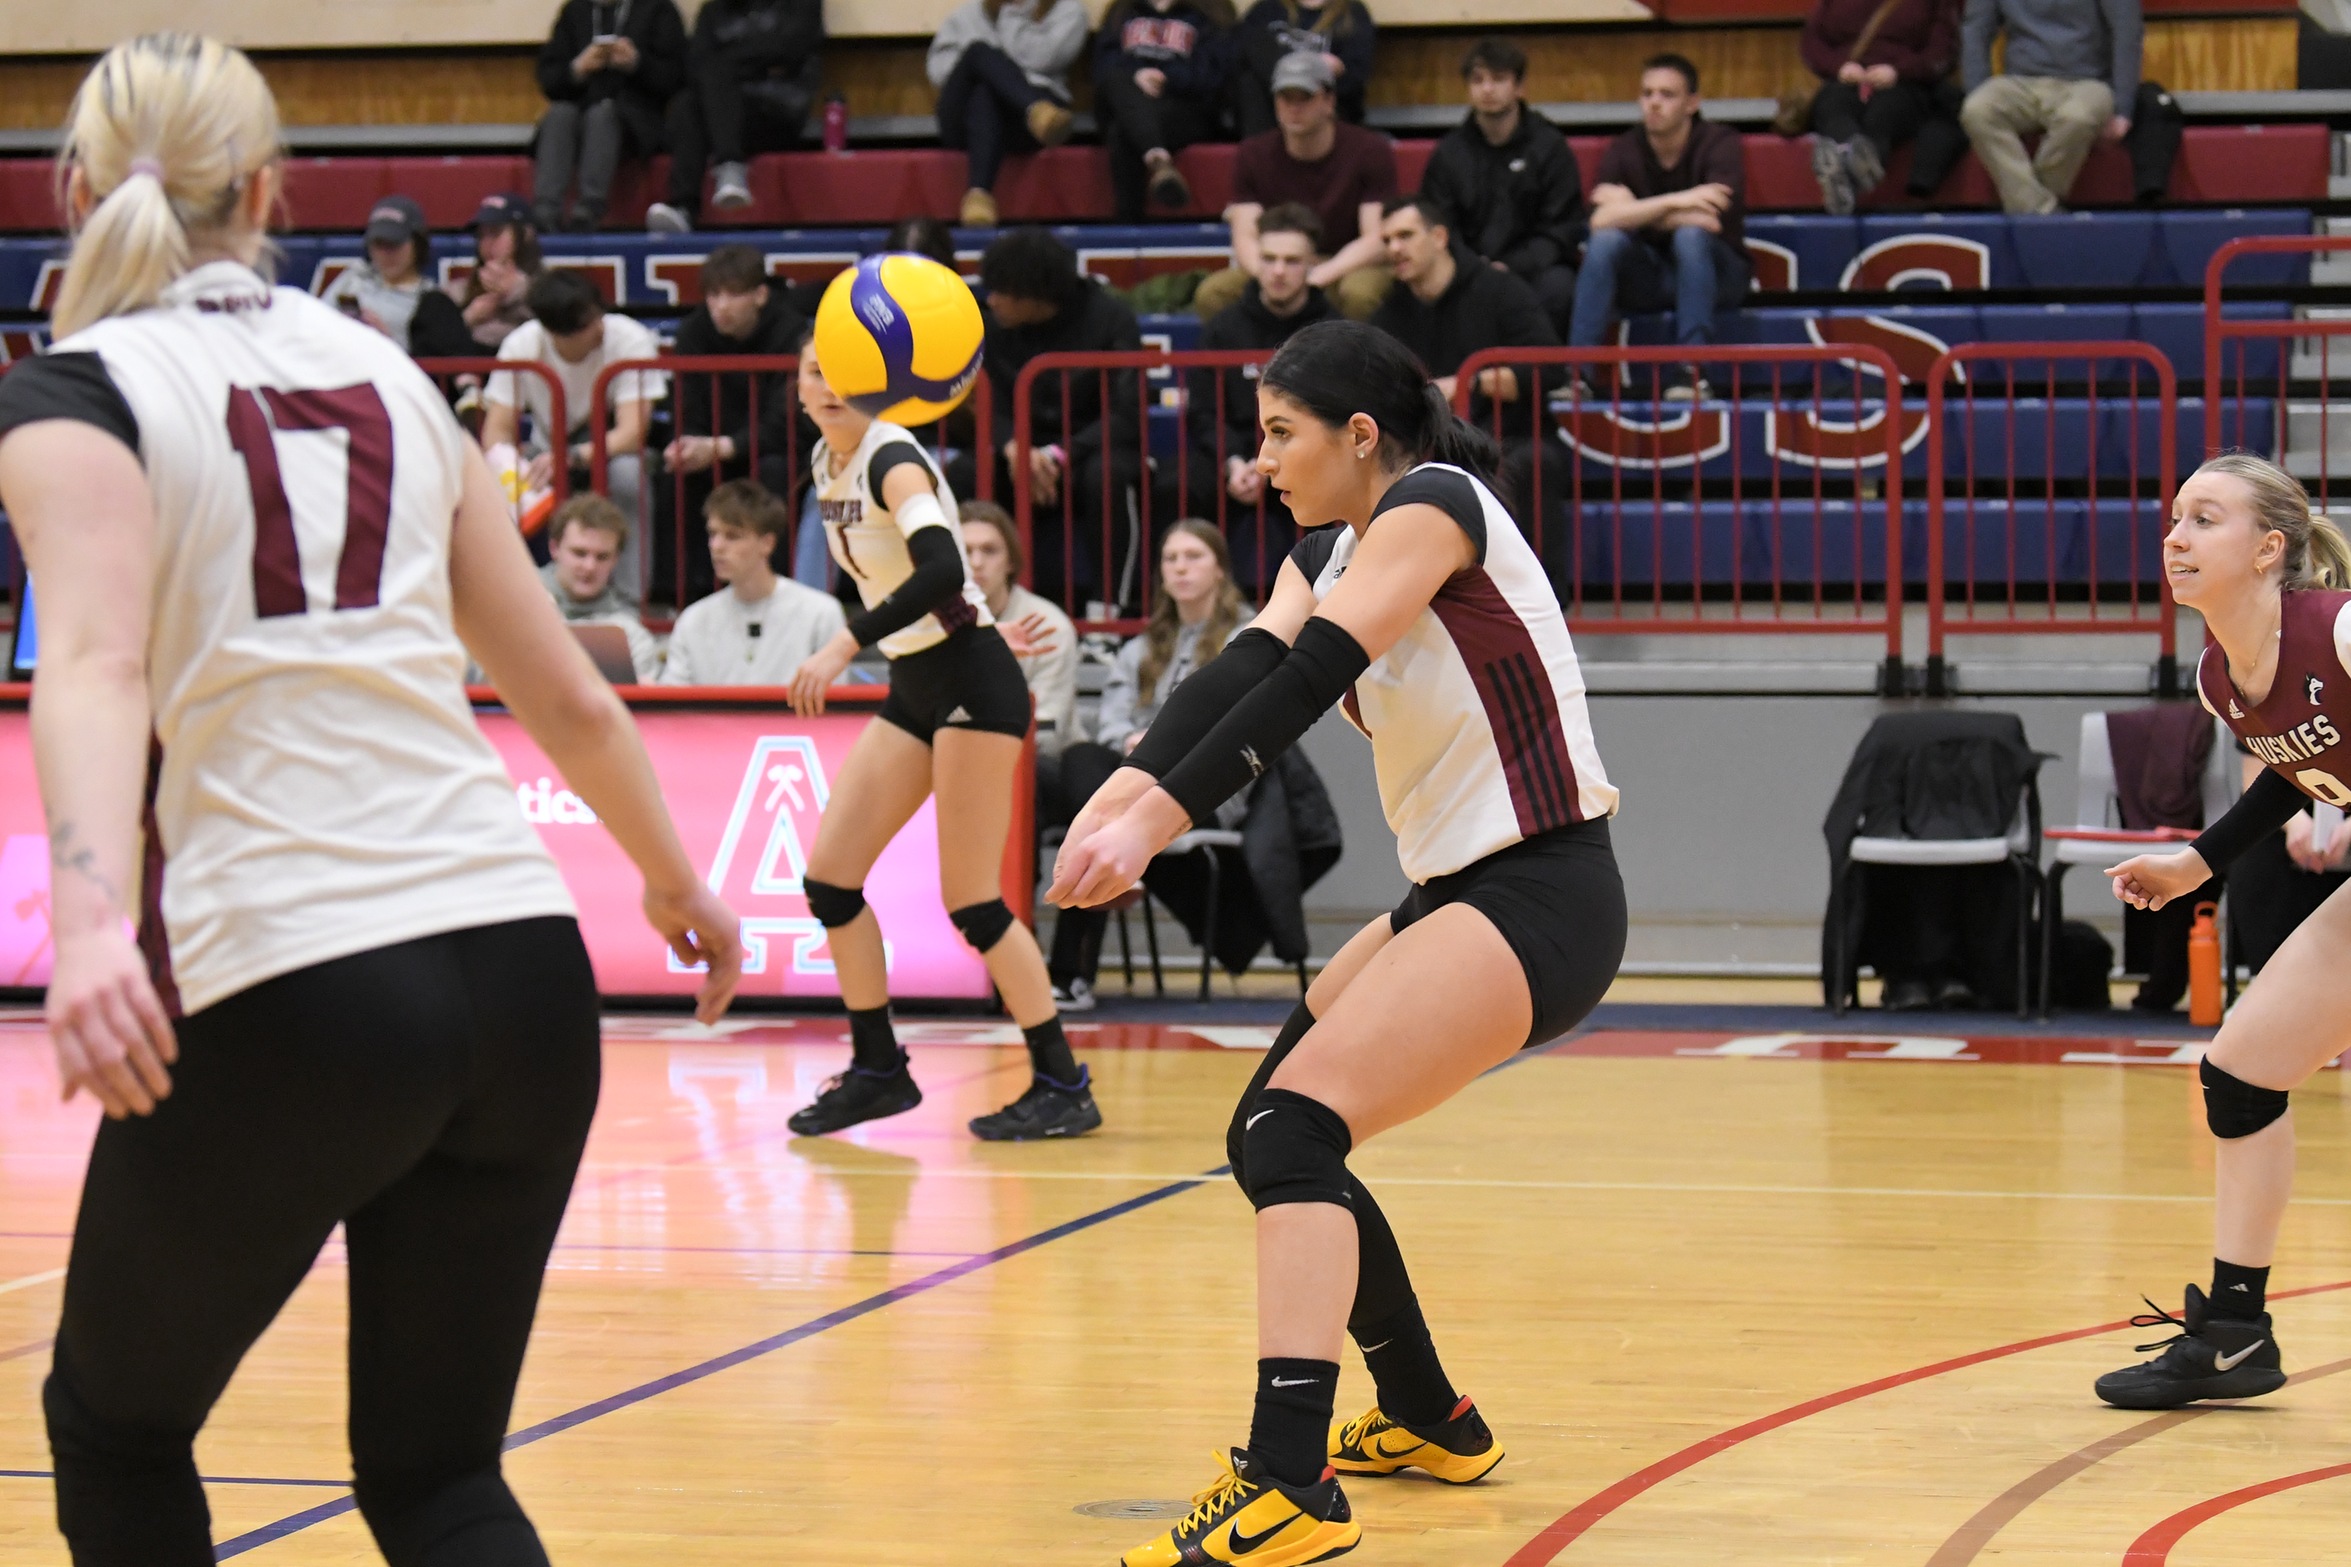 Huskies win ninth straight match, defeating Axewomen in five sets